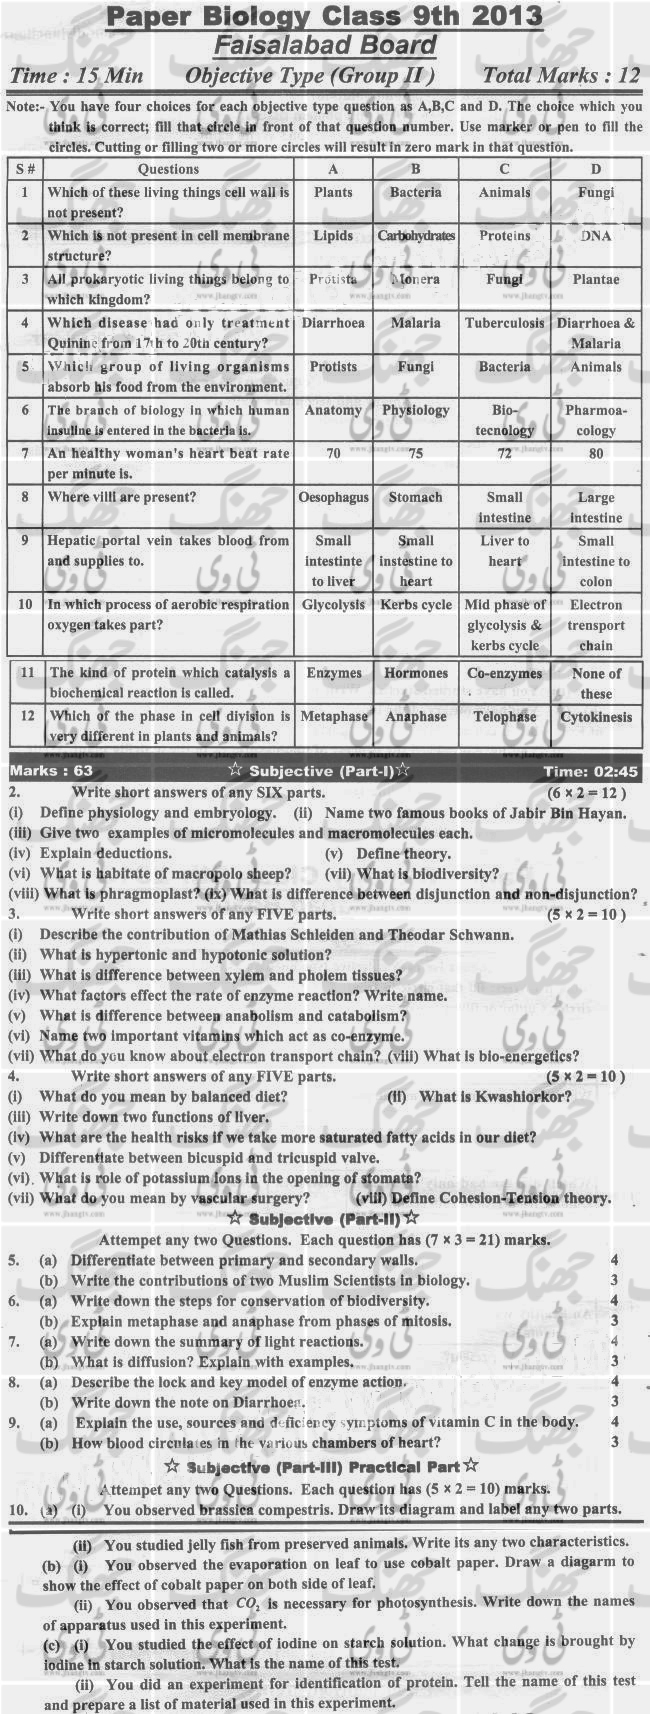 Past-Papers-2013-Faisalabad-Board-9th-Class-Biology-Group-2-English-Version copy